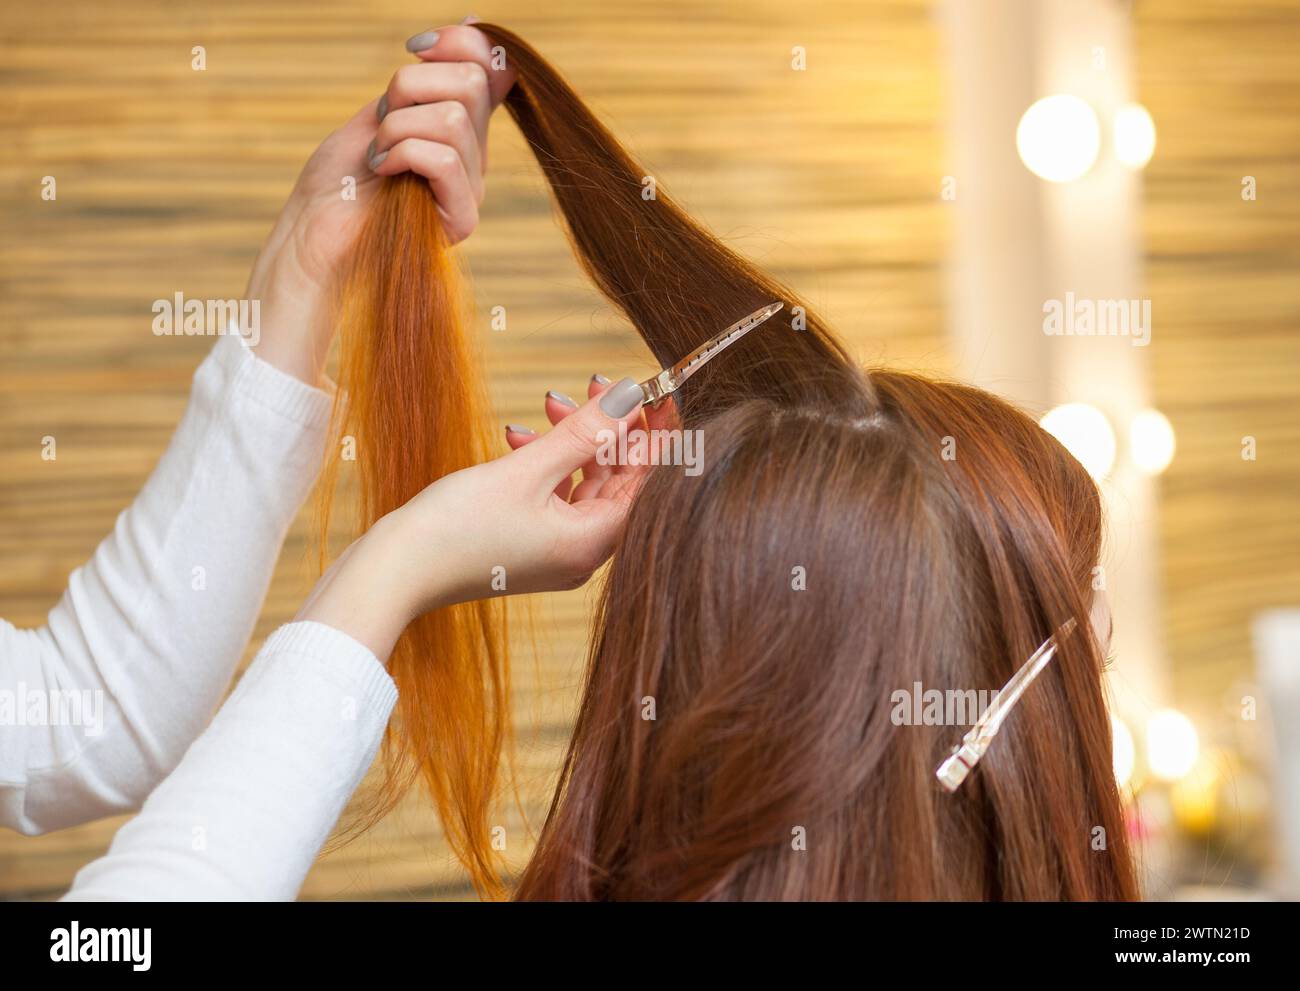 Hairdresser combing her long, red hair of his client in the beauty salon. Professional hair care and creating hairstyles. Stock Photo